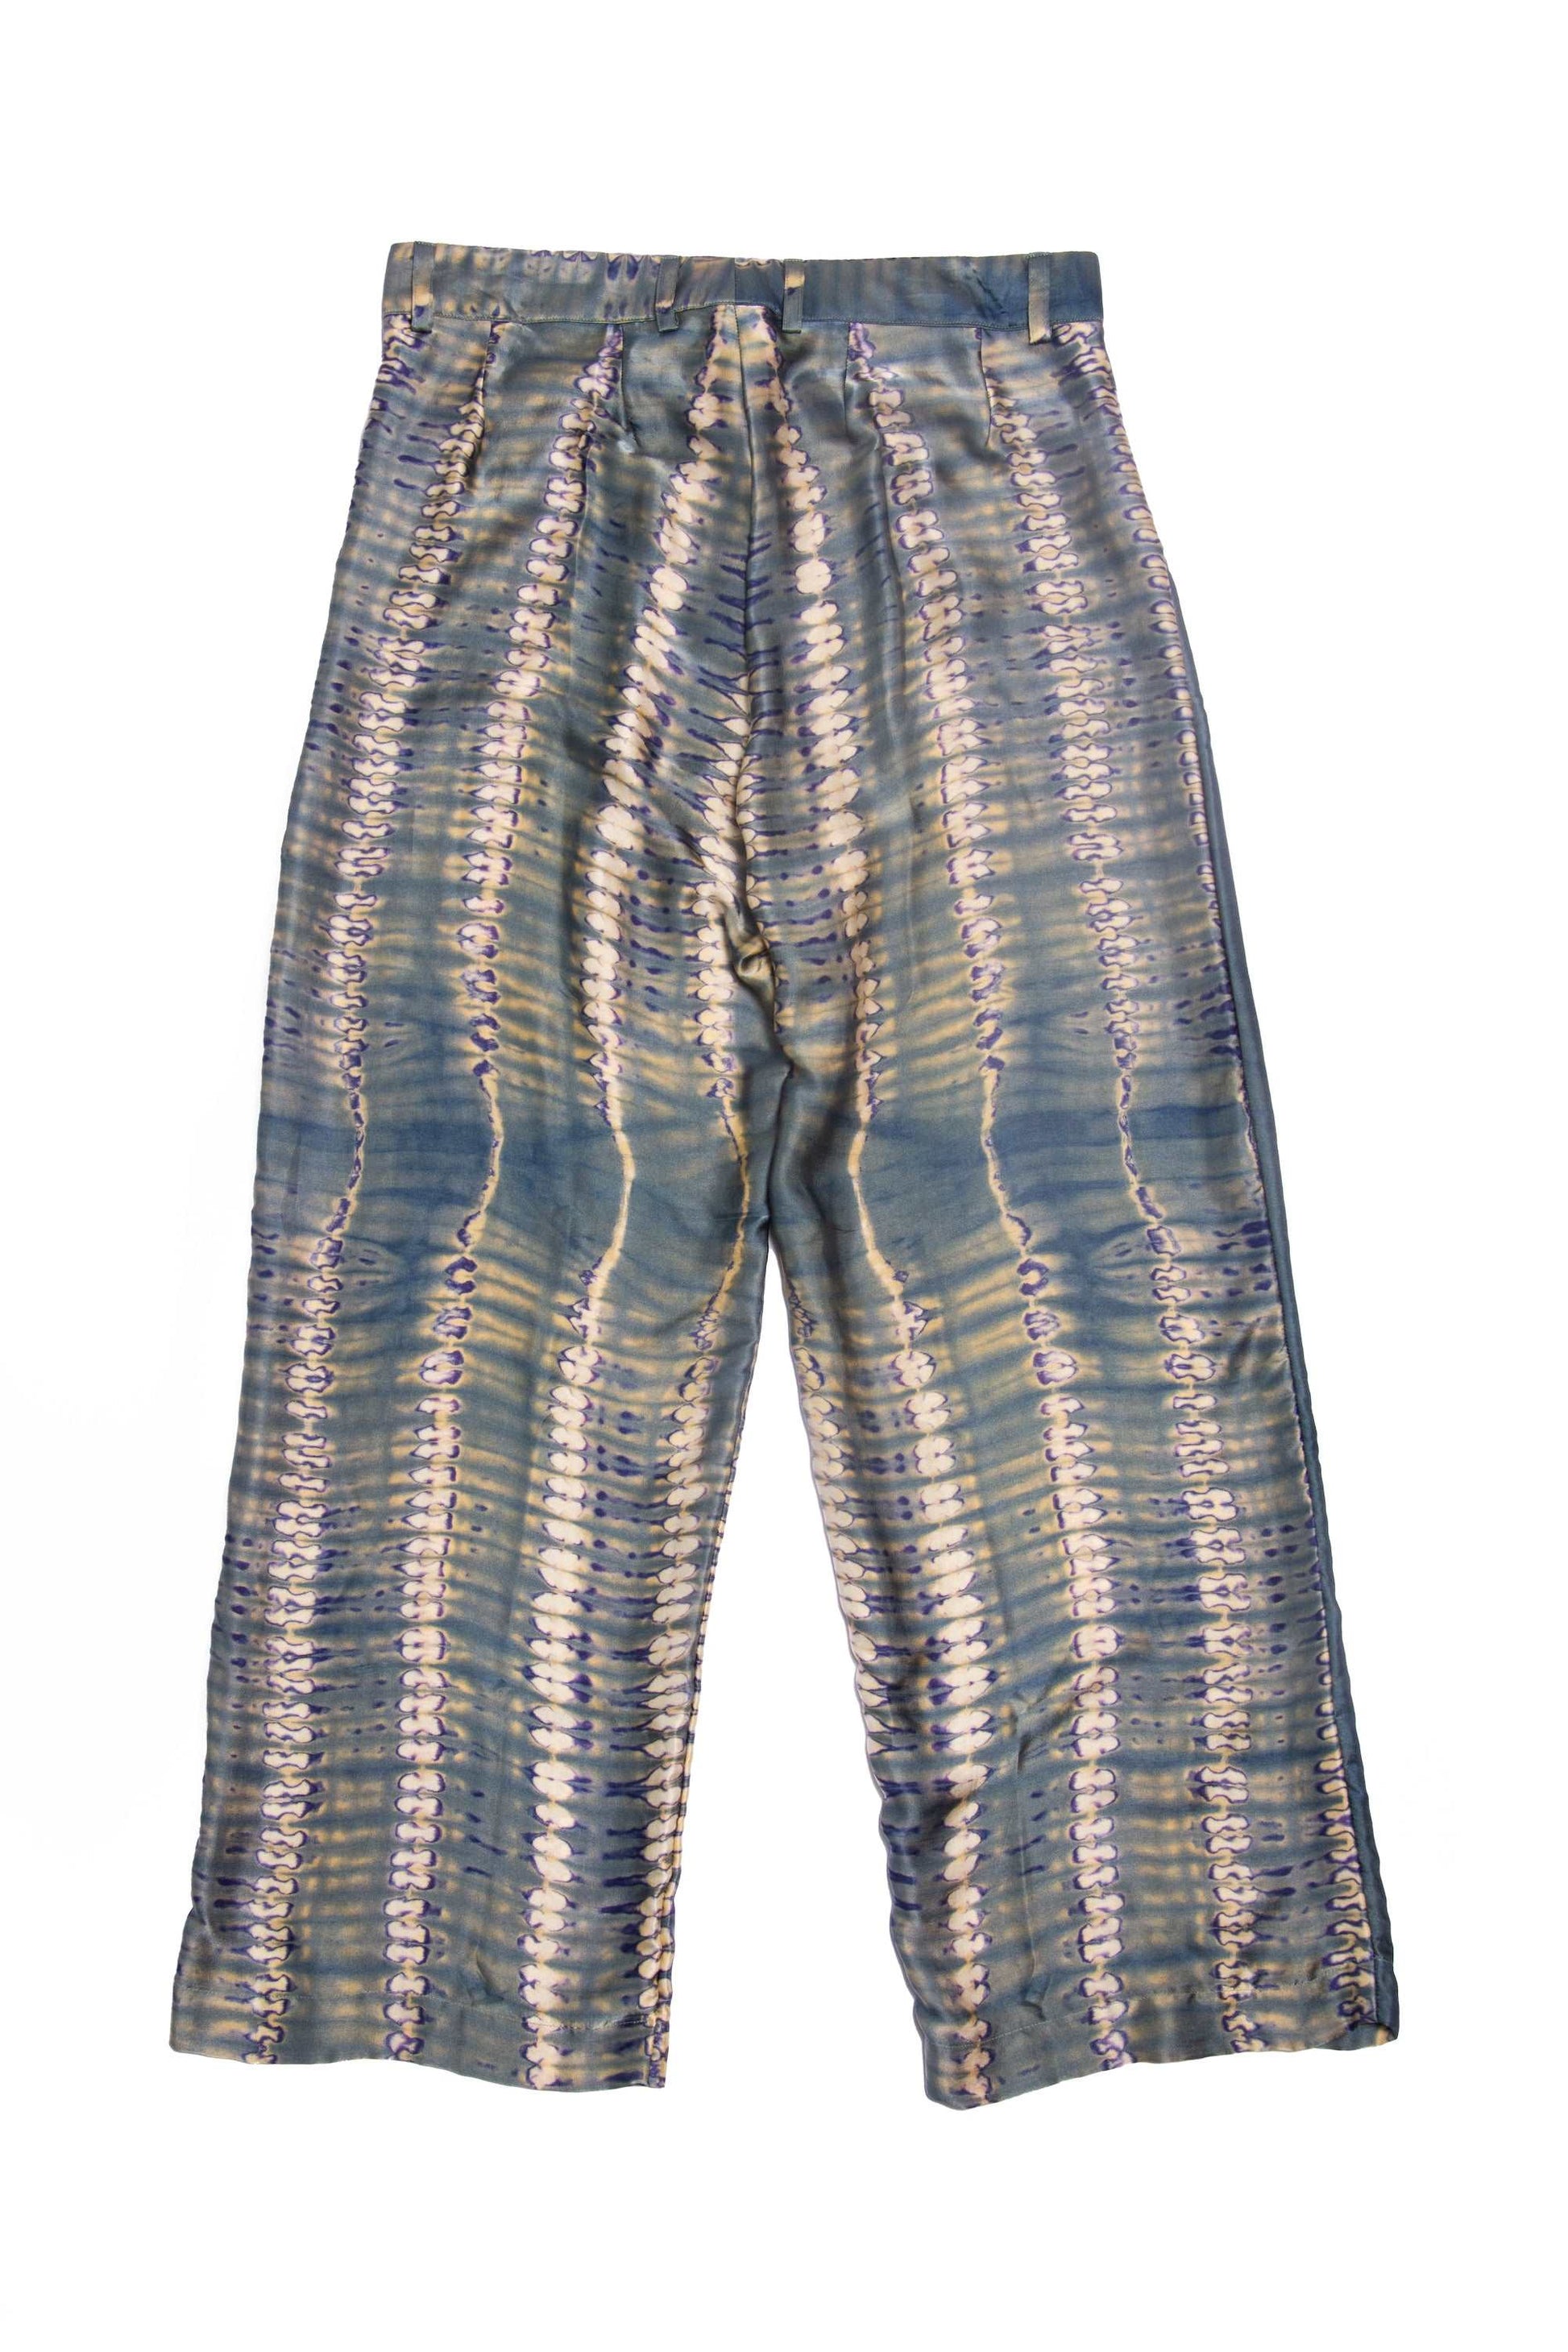 Unisex statement silk tie dye hand made pants made in Indonesia Designed in Australia